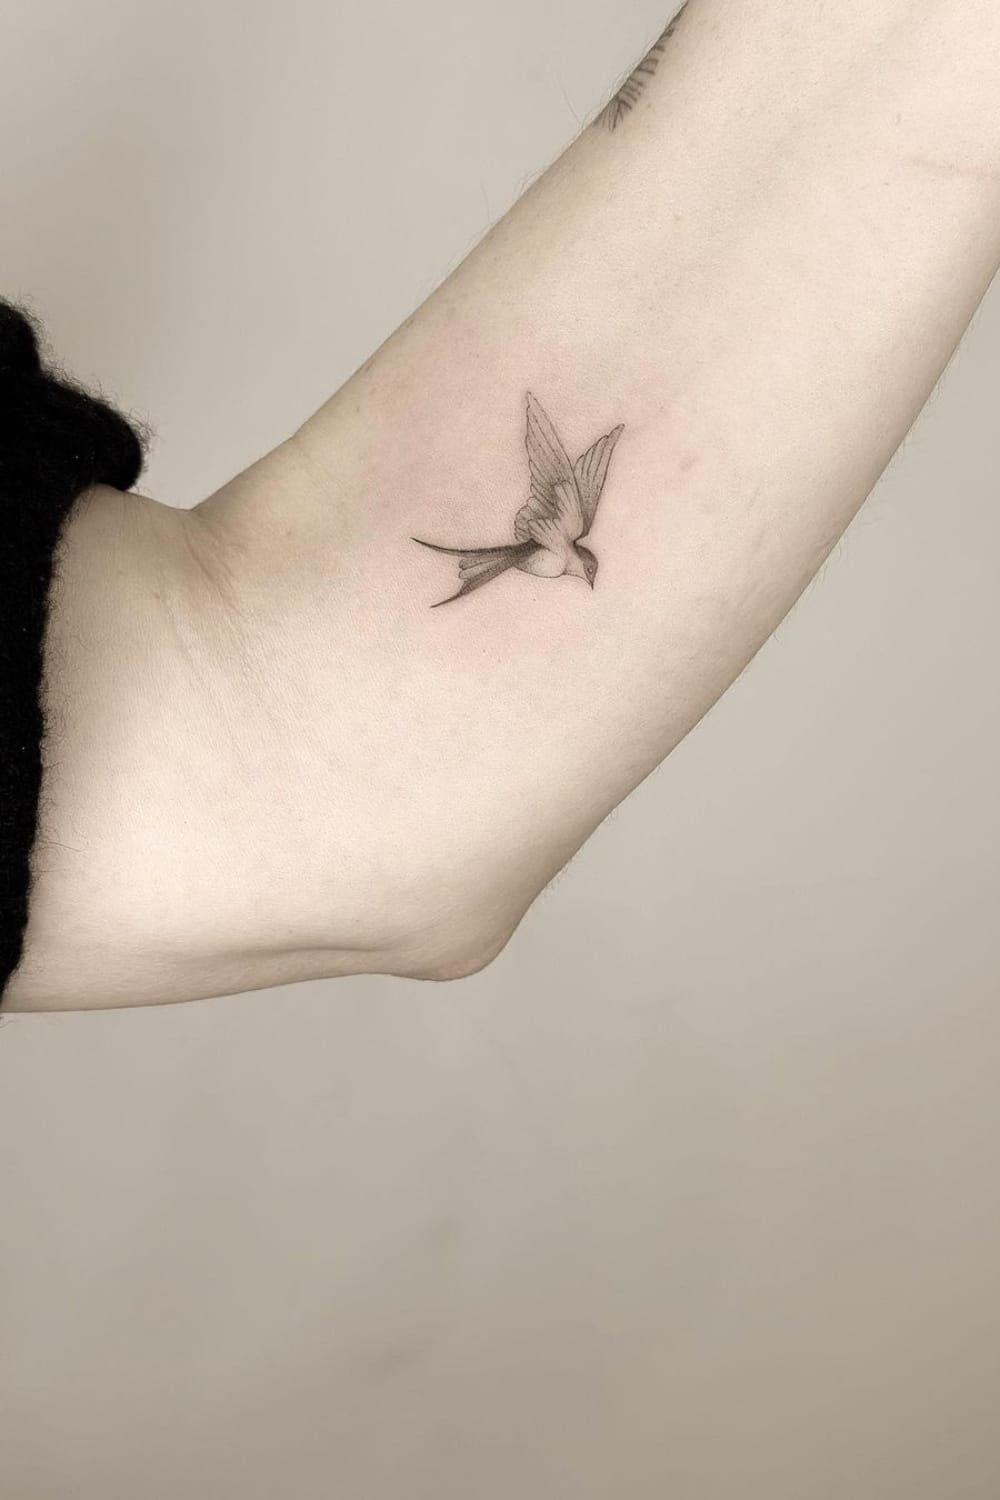 41 Unique Swallow Tattoo Ideas With Meaning